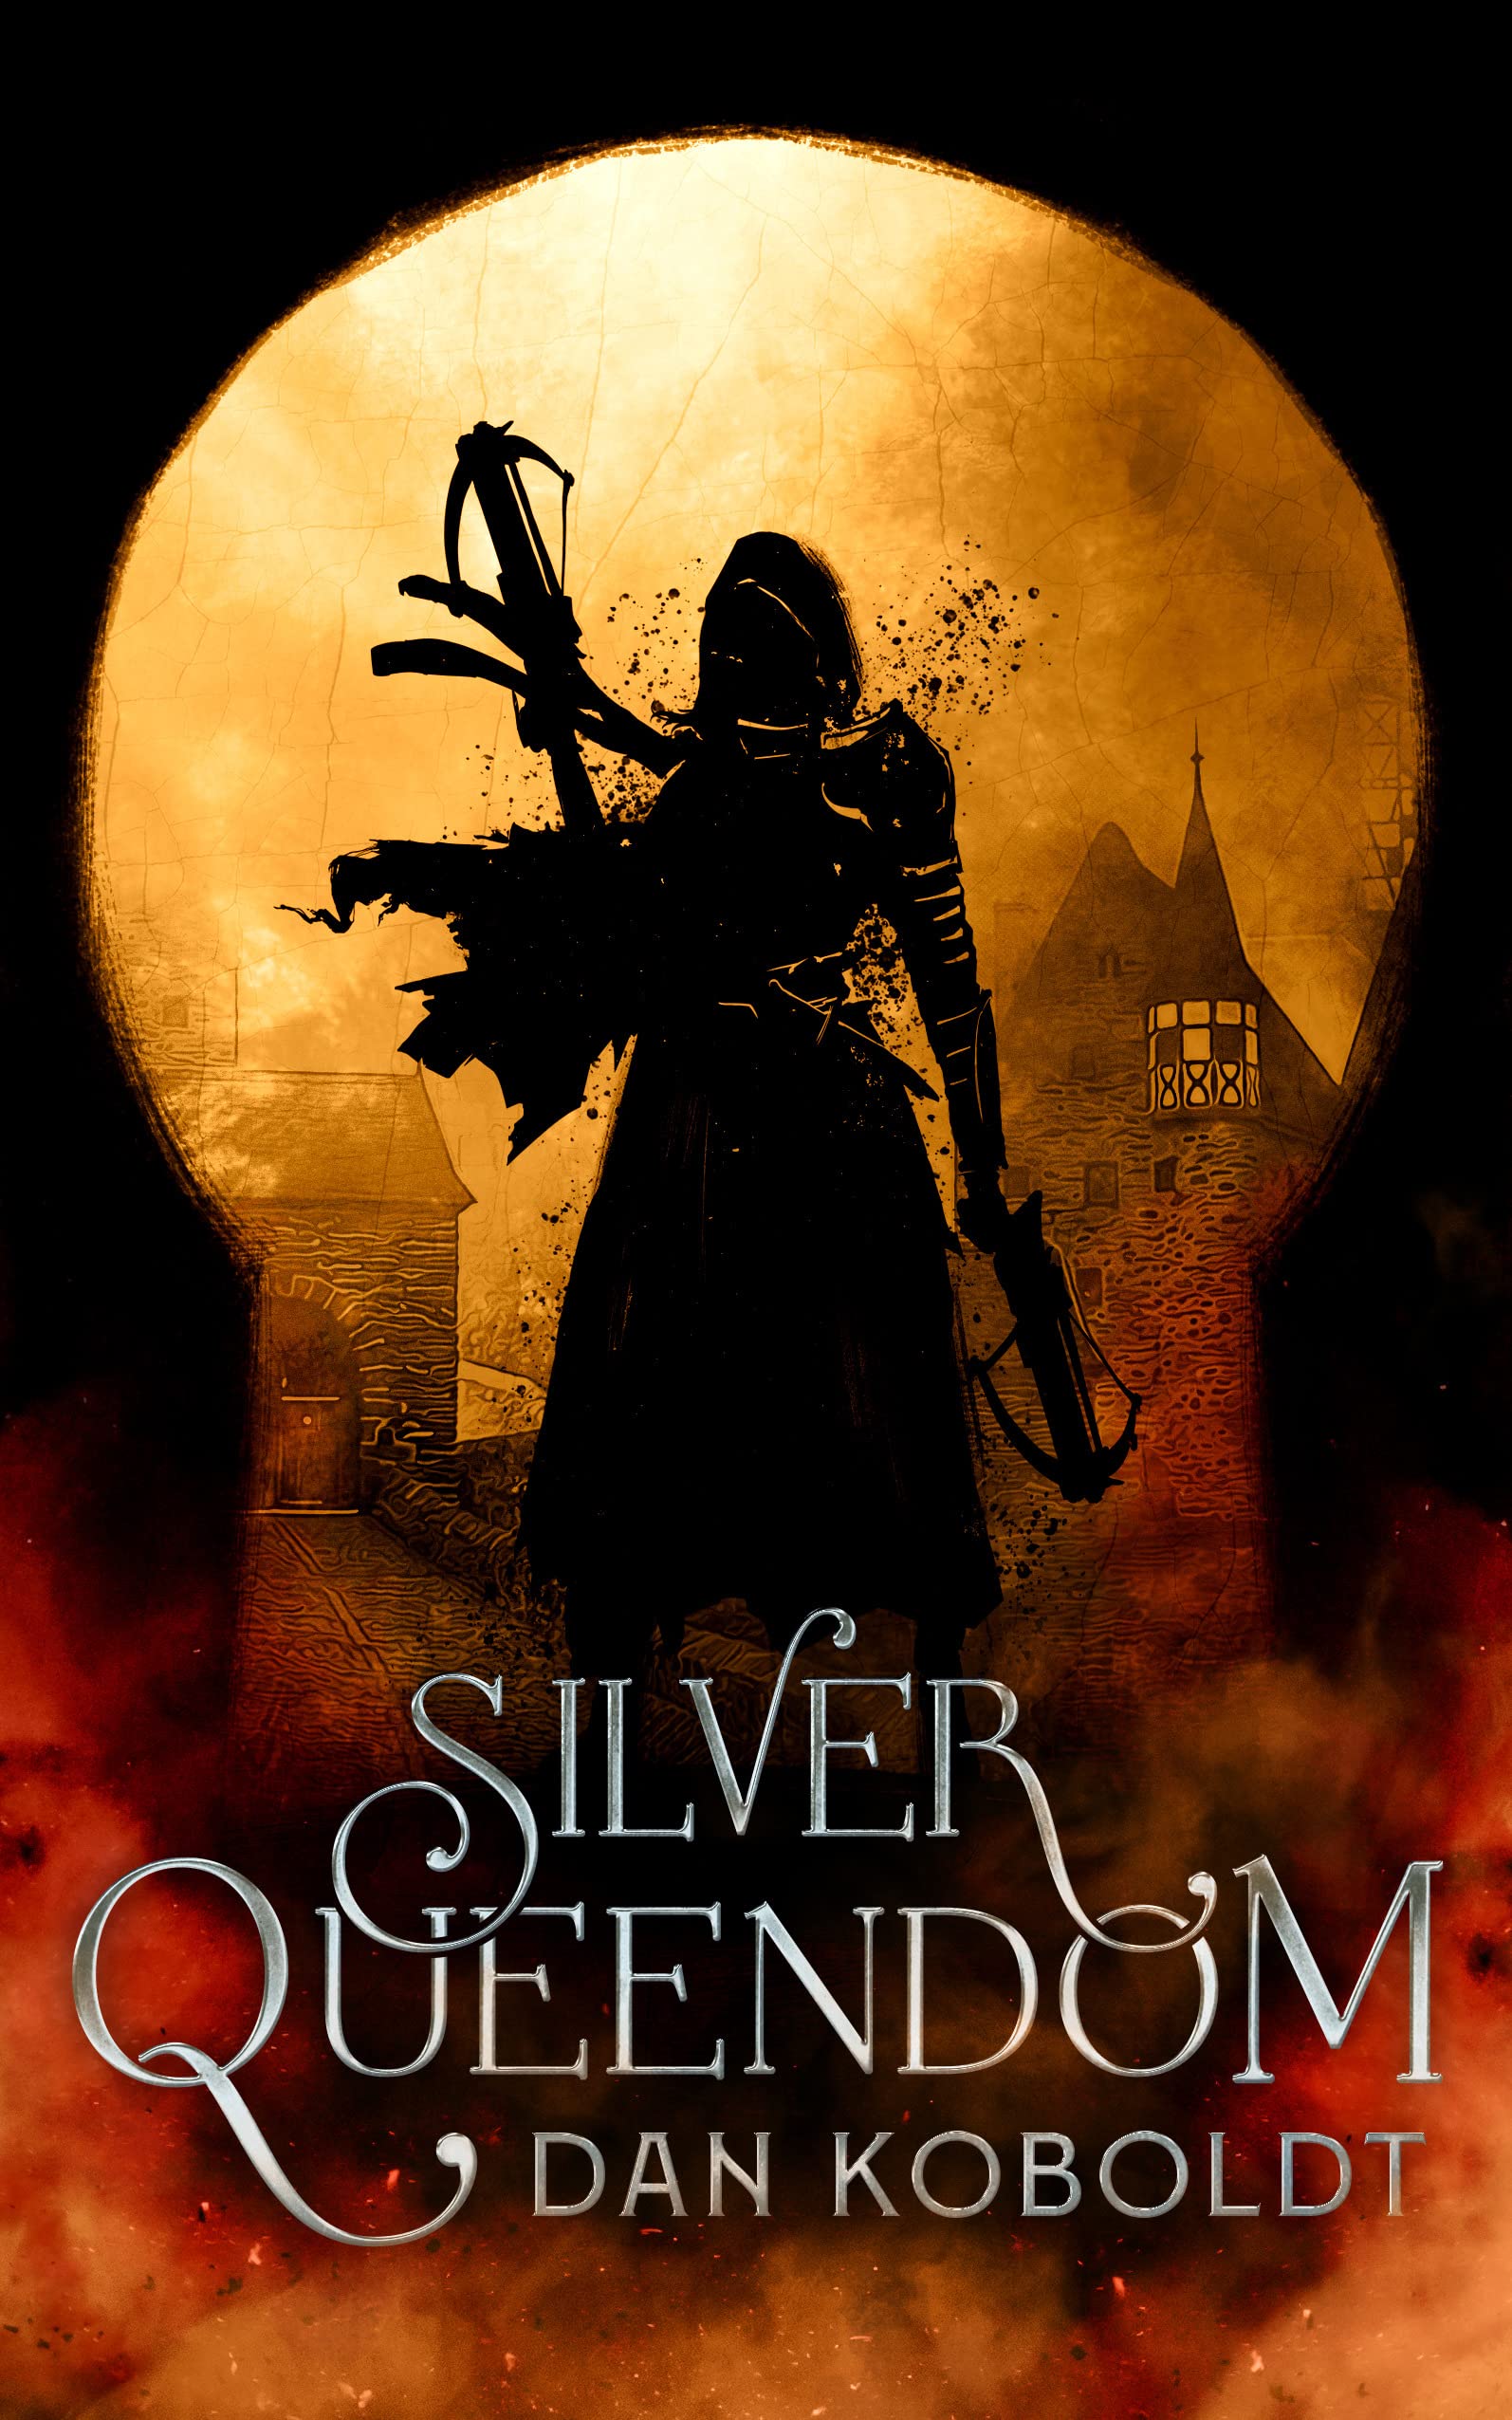 cover for dan koboldt's 'silver queedom'